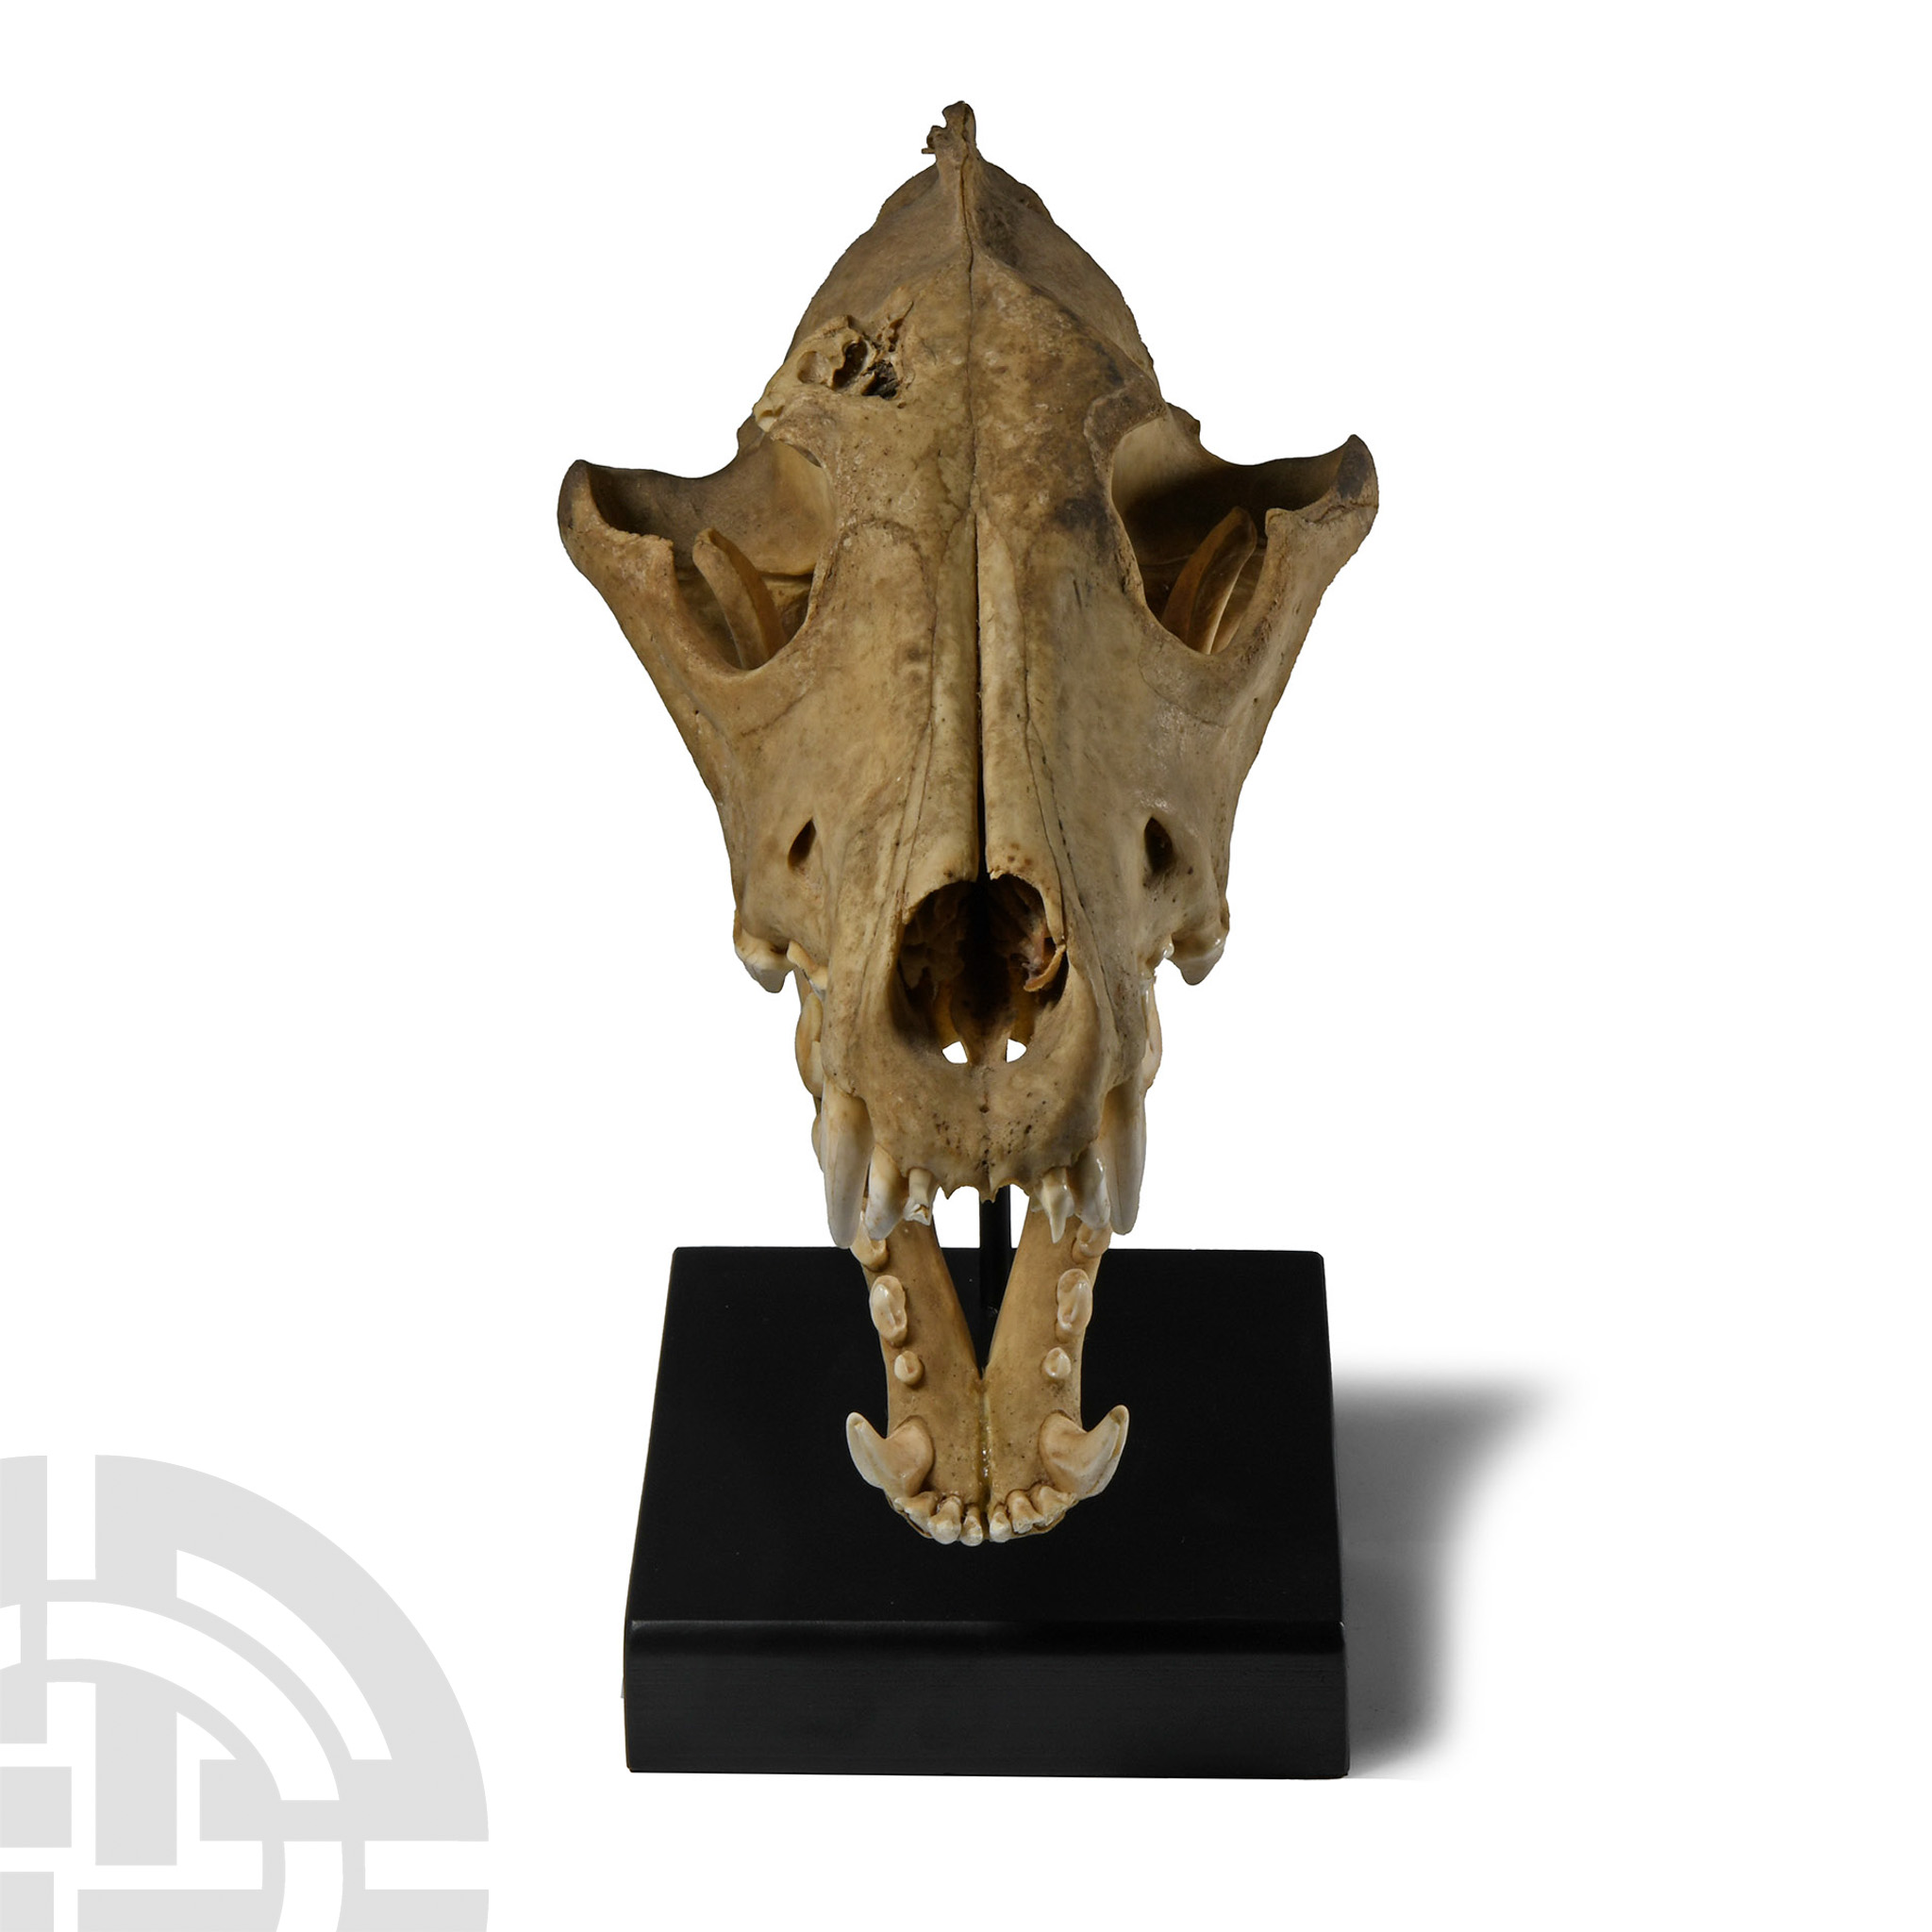 Natural History - Canis Teilhardi Wolf's Skull - Image 2 of 3